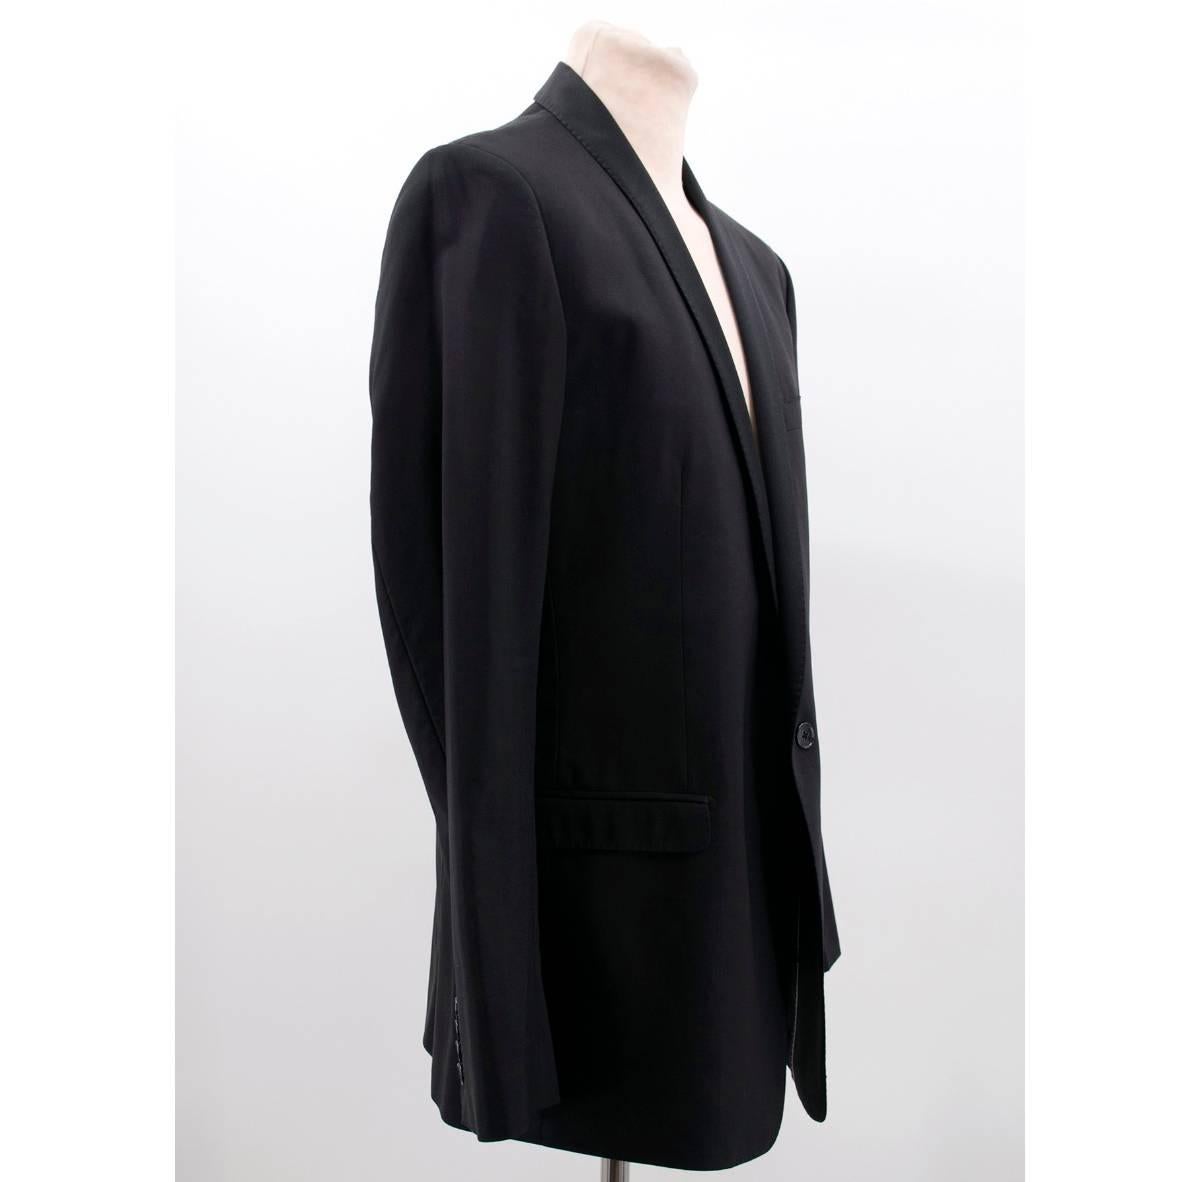 Dolce & Gabbana Black Tuxedo Jacket In New Condition For Sale In London, GB